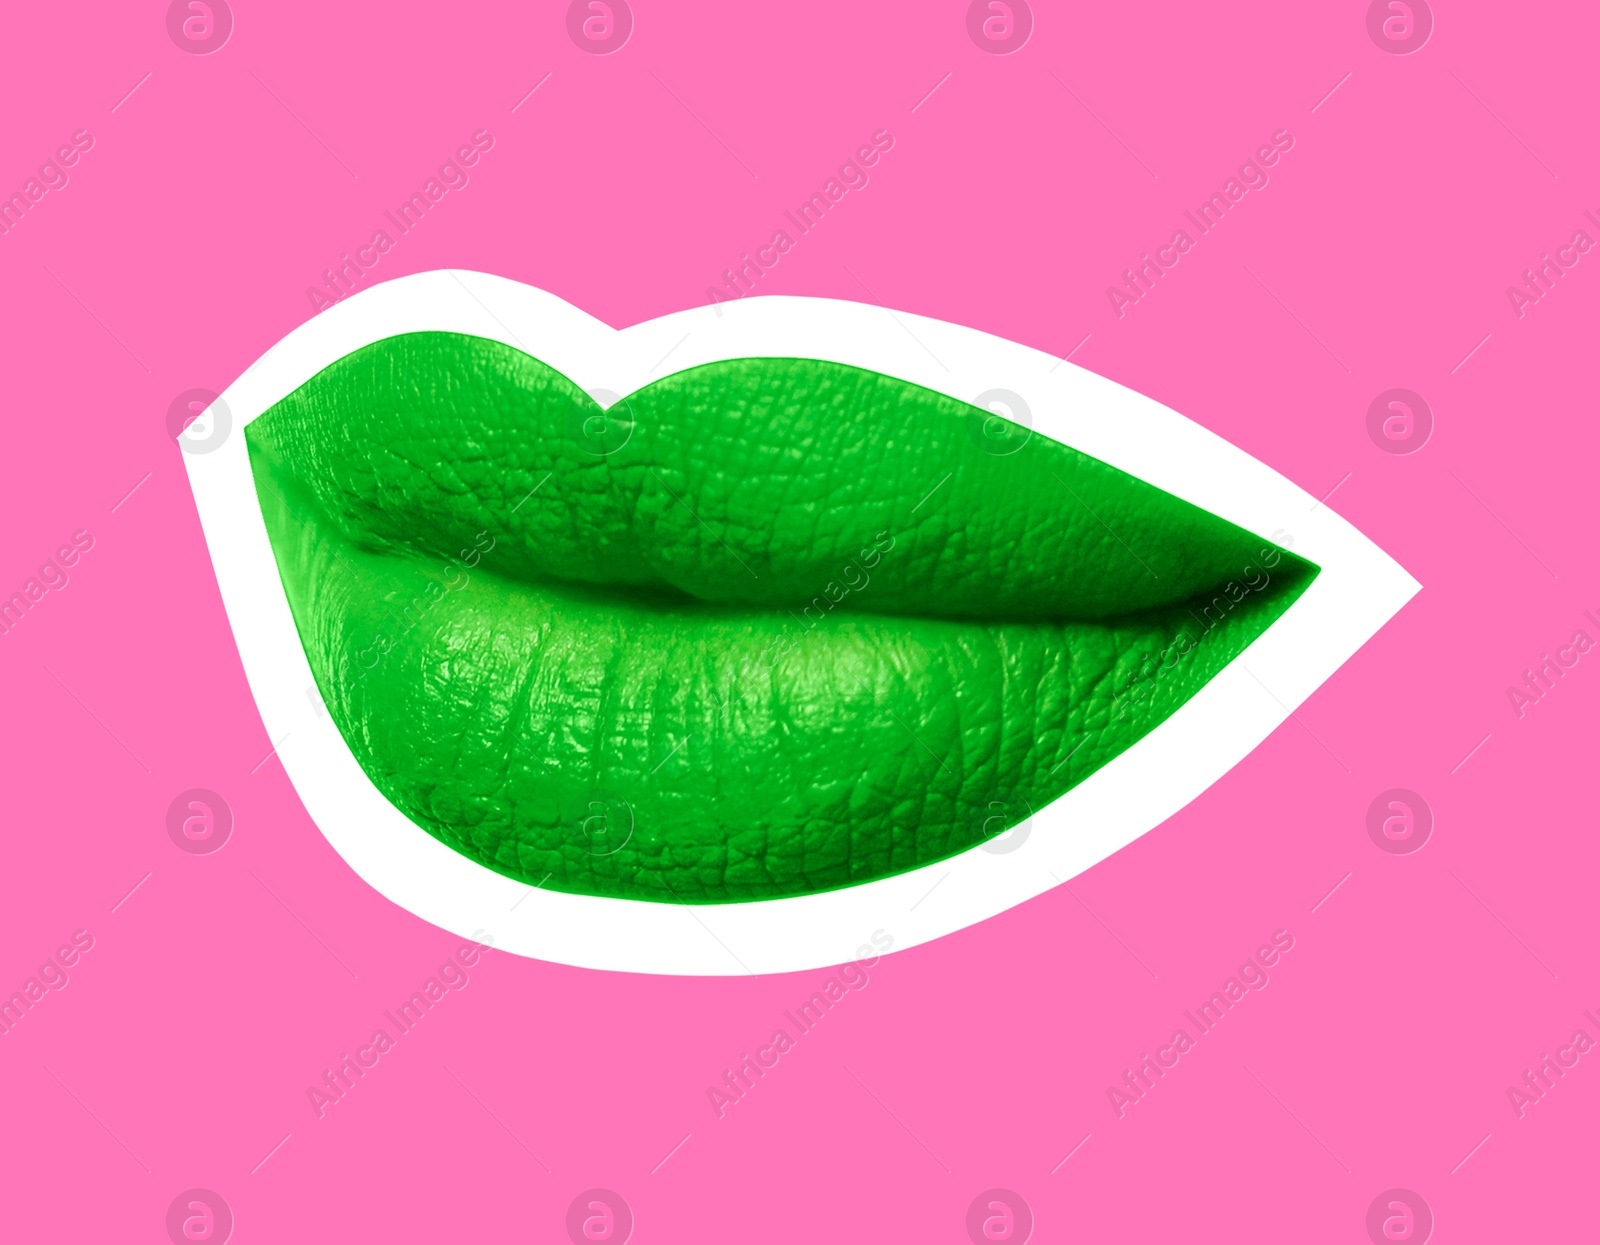 Image of Woman's lips with green lipstick and white outline on pink background. Magazine cutout, stylish design